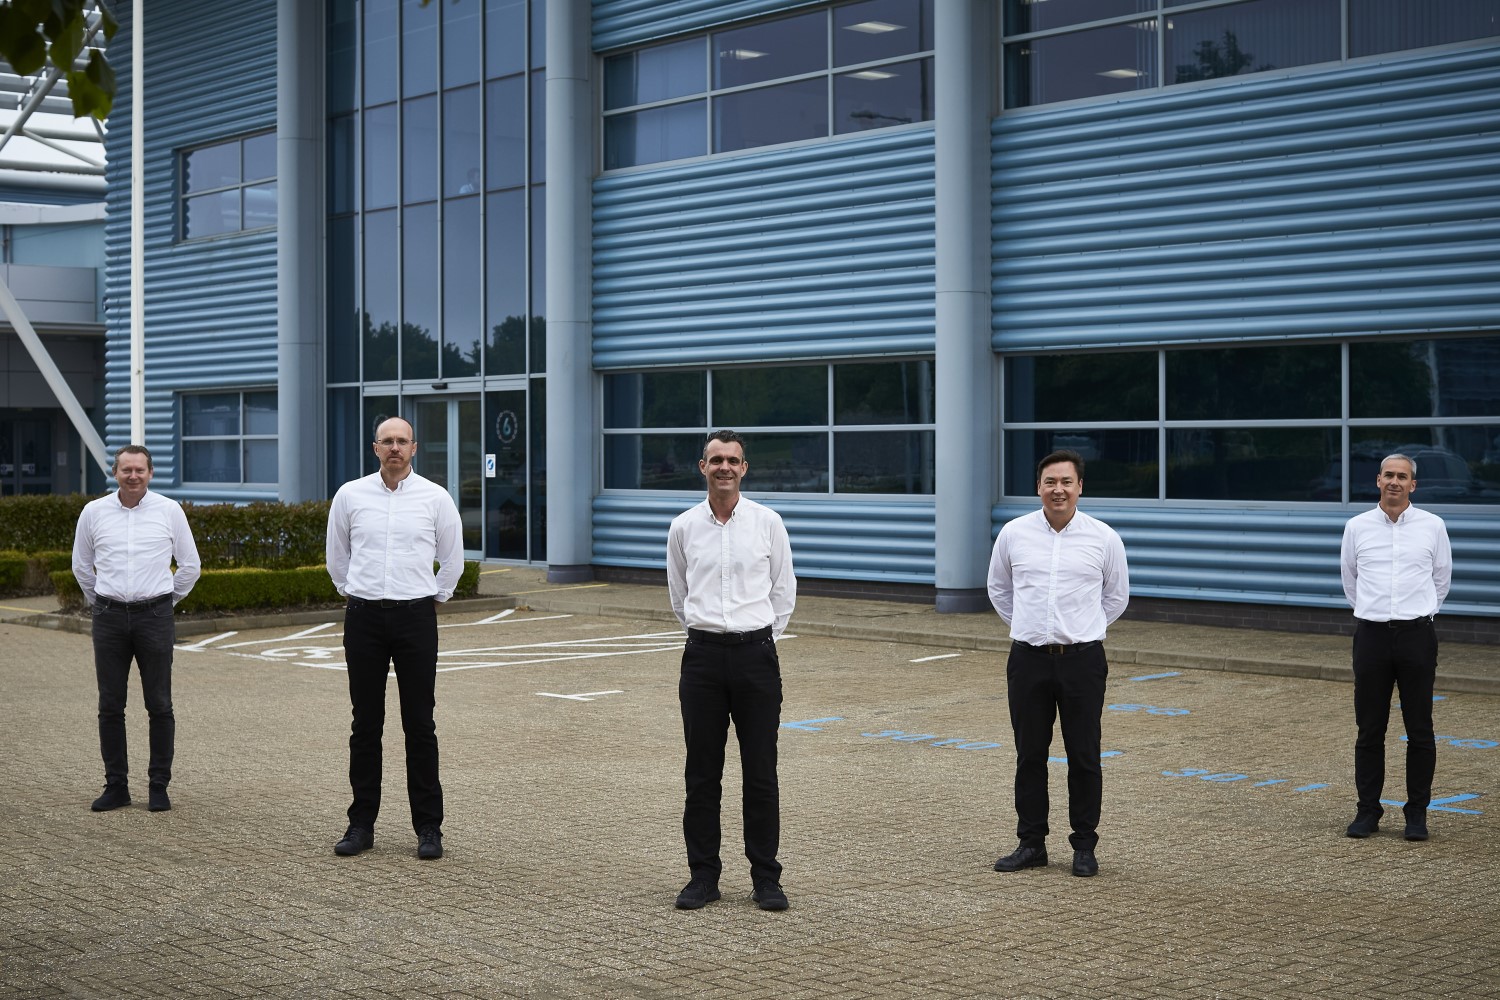 Revised senior management structure at Mercedes-AMG High Performance Powertrains (from left to right): Ronald Ballhaus (Finance and IT Director), Adam Allsopp (Project One Powertrain Director), Hywel Thomas (Managing Director), Richard Stevens (Operations Director), Pierre Godof (Formula E Powertrain Chief Engineer)